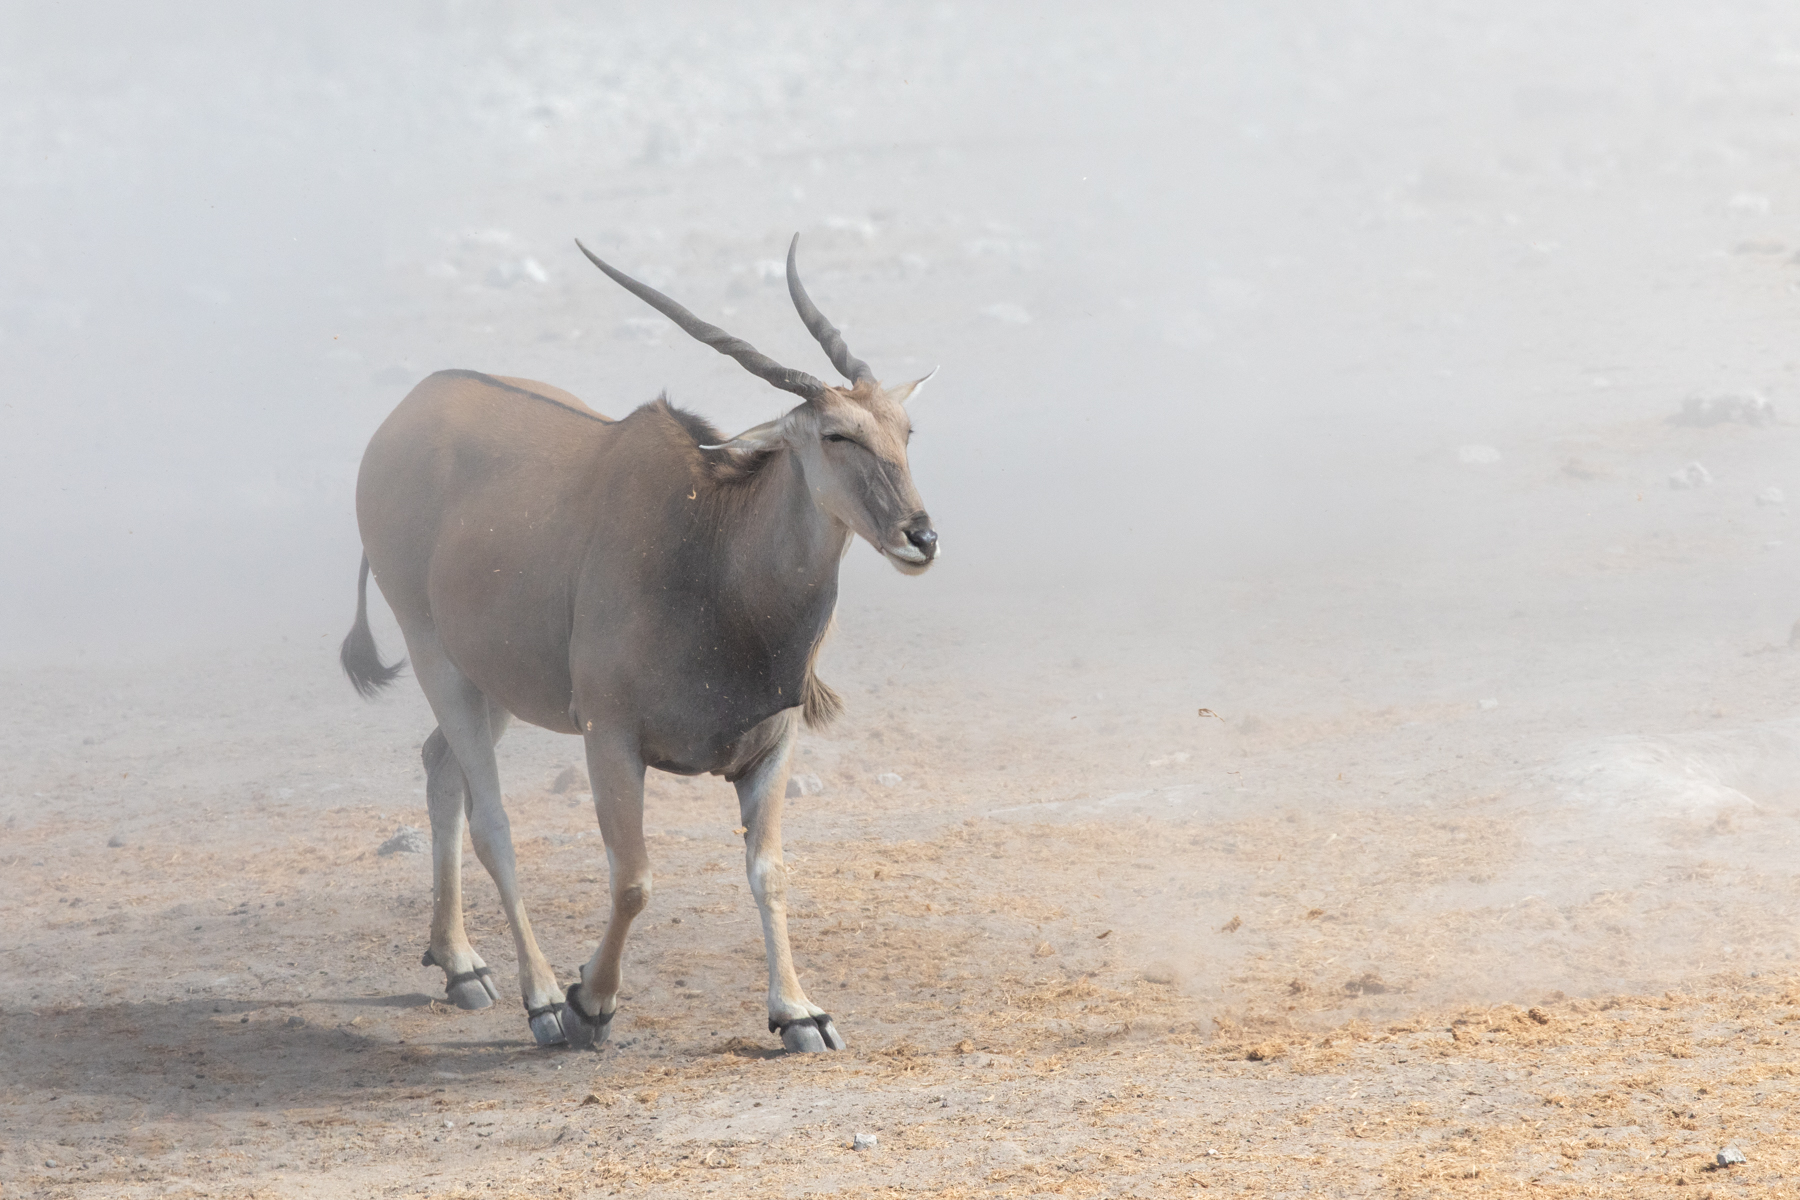 An Eland braces itself for the dust of a sudden whirlwind in Etosha